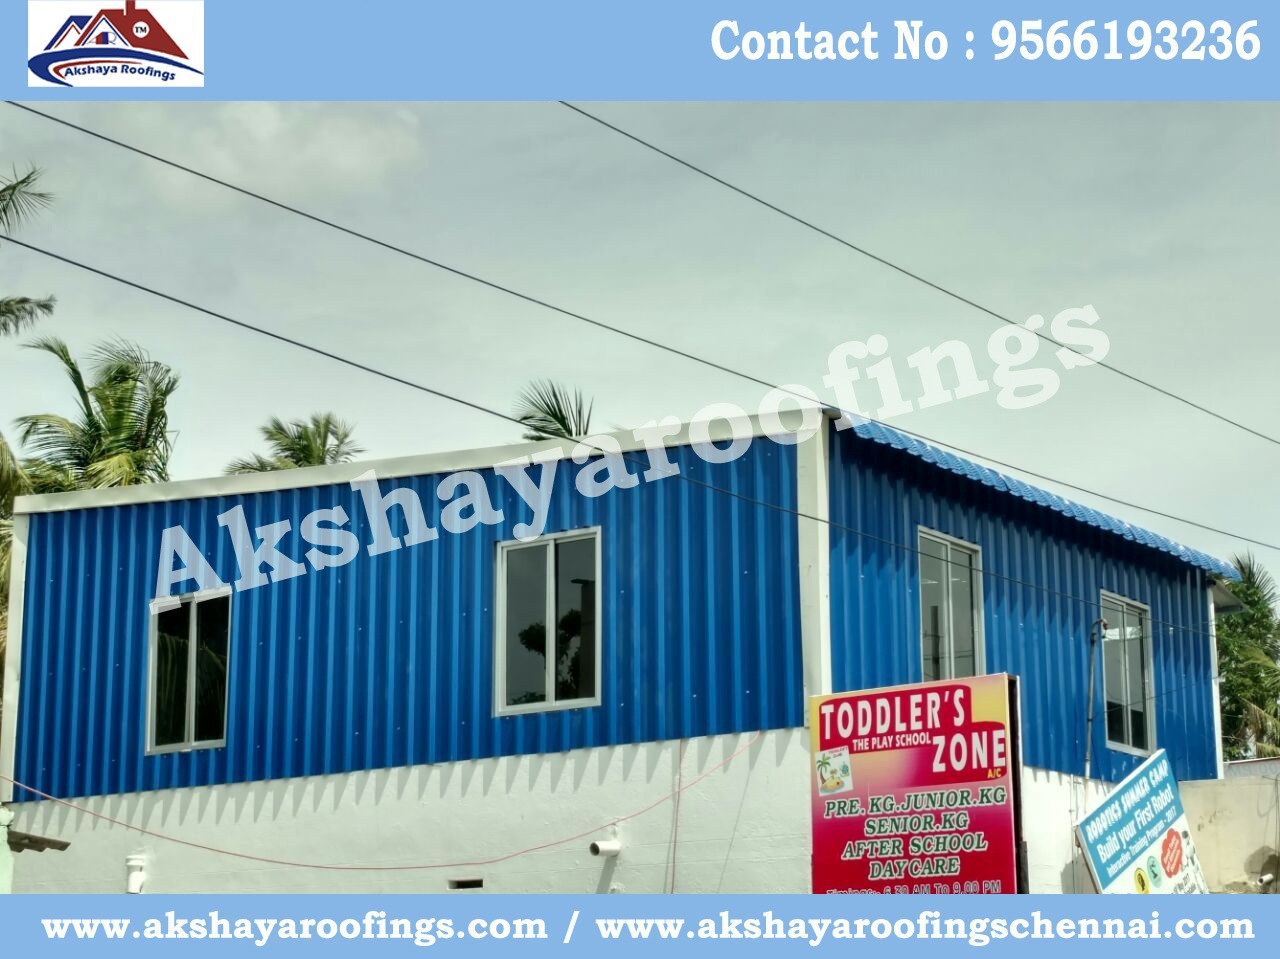 Terrace Roofing Shed Contractors in Chennai